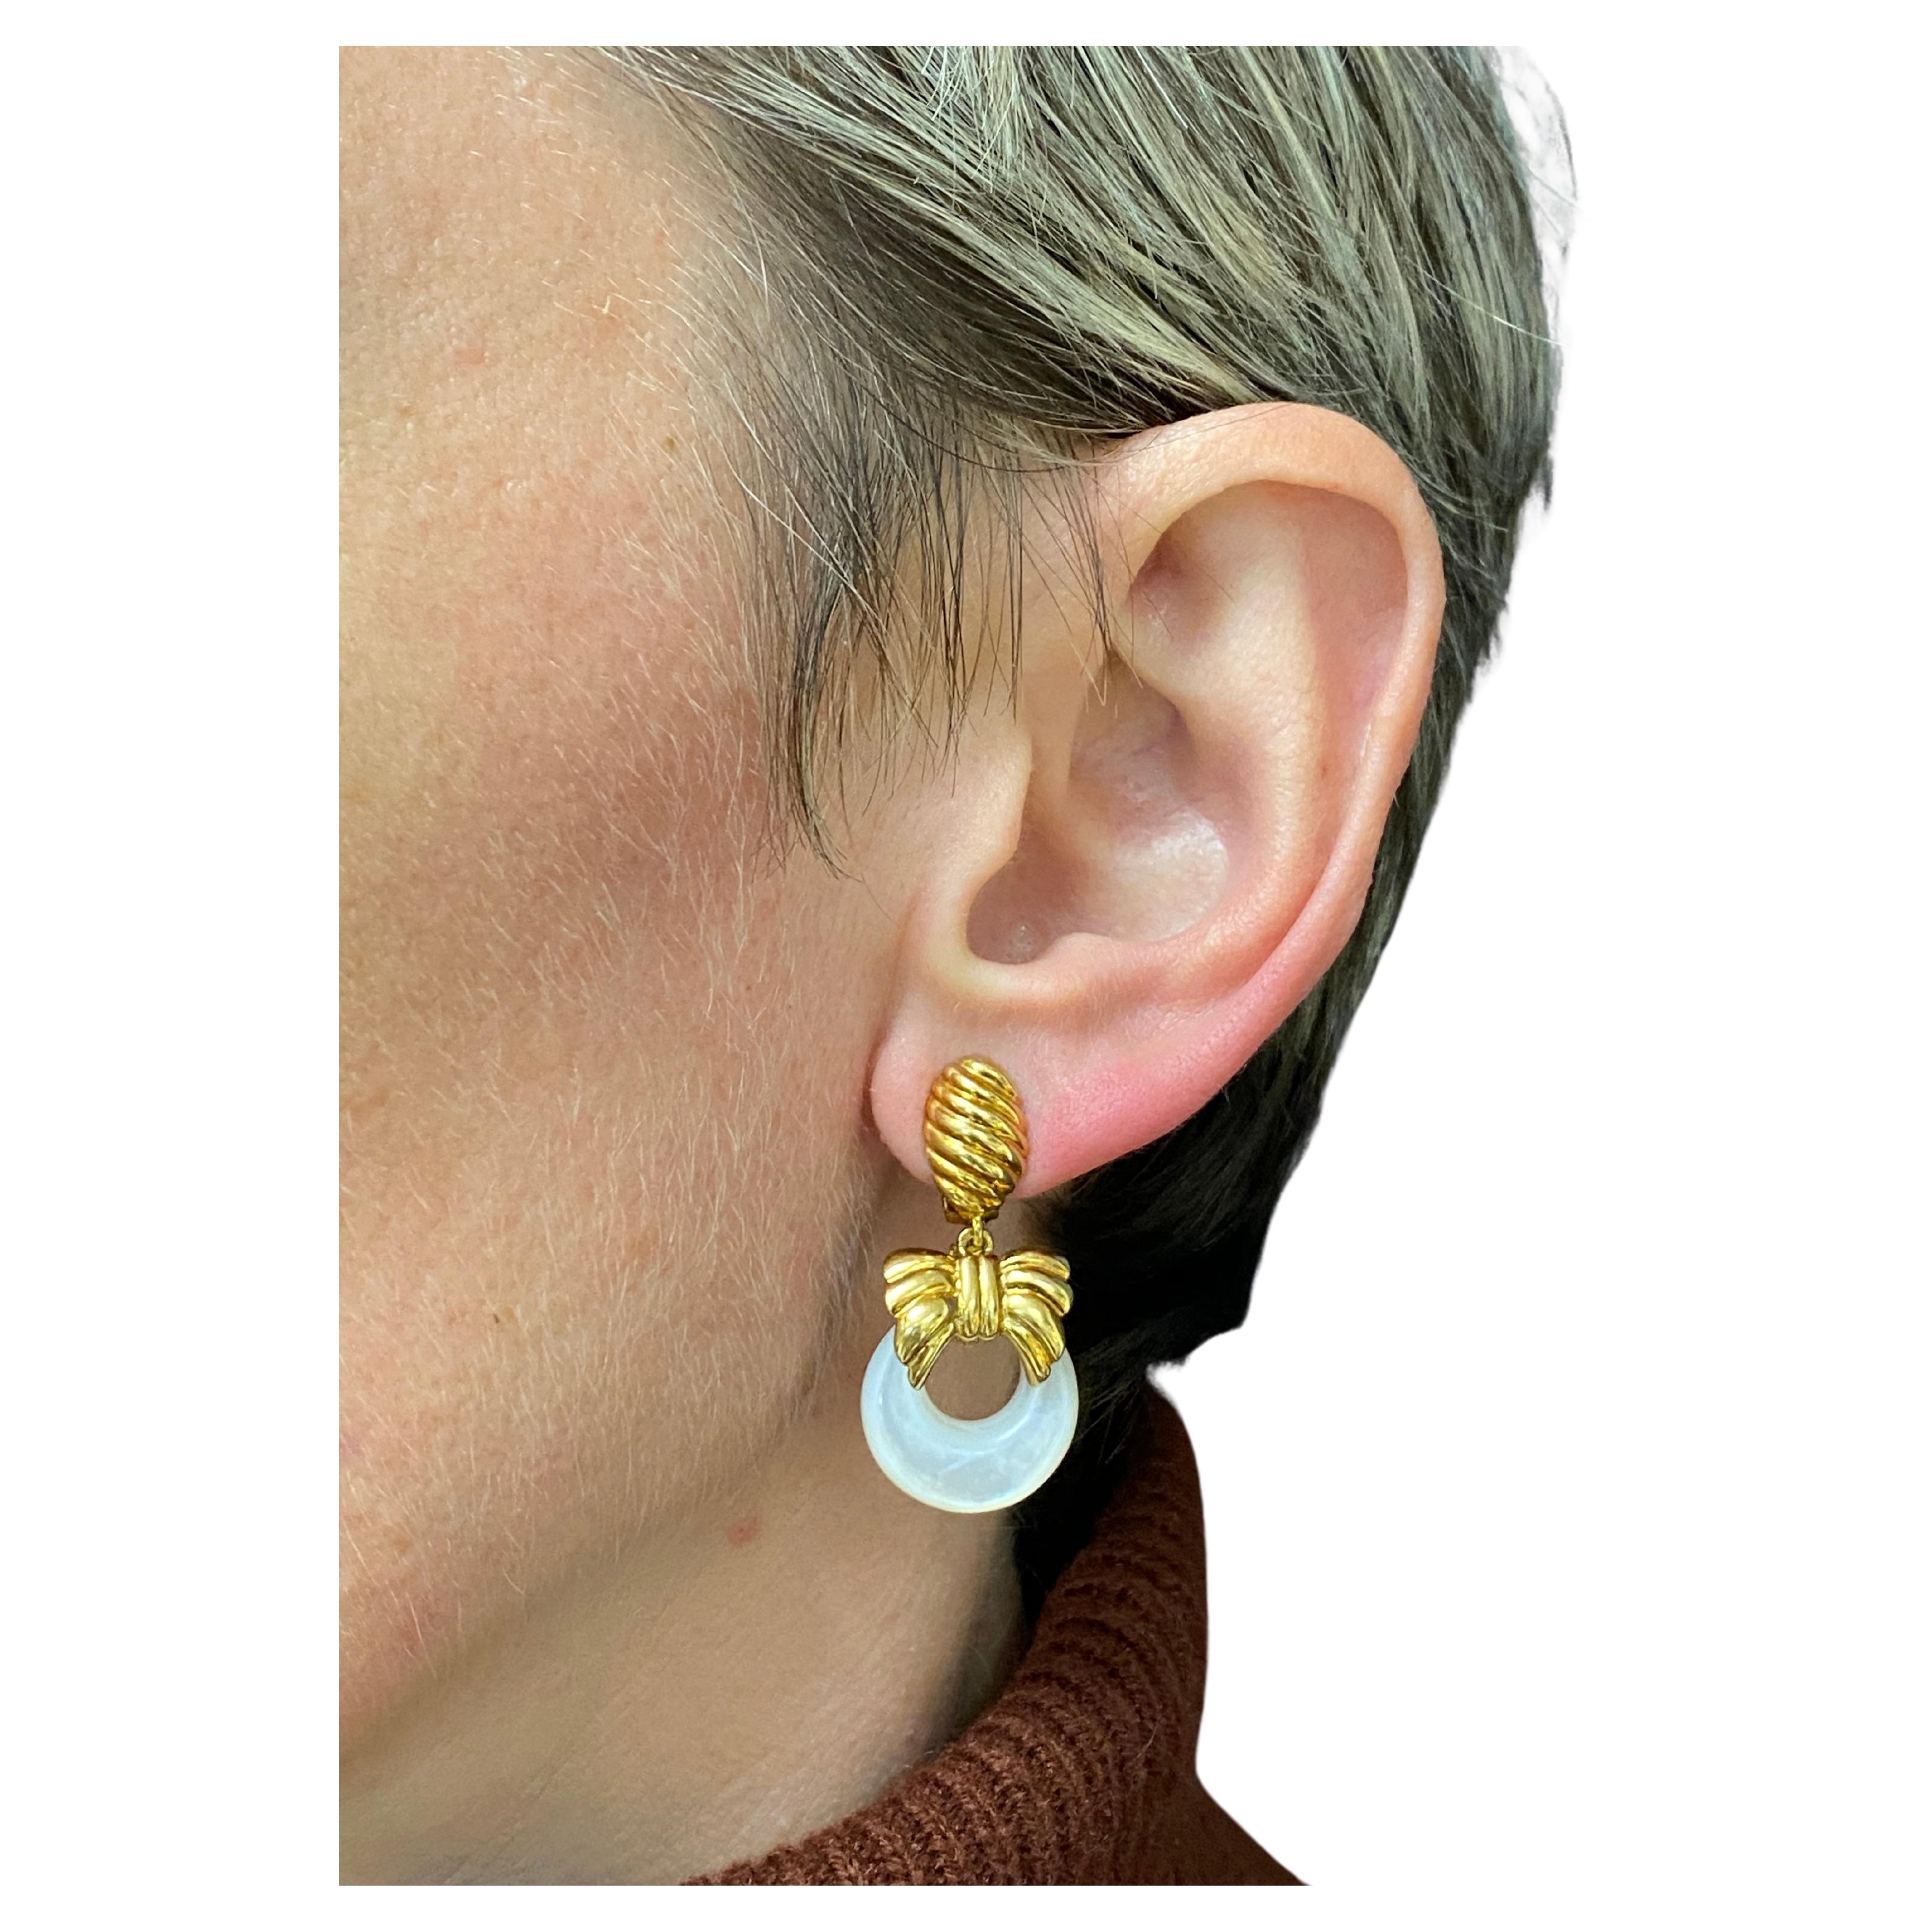 
A set of three interchangeable earrings by VCA, made of 18k gold, pearl, malachite and lapis lazuli. The earrings consist of the gold bow-shape element that holds a removable disk.  The disks are doorknocker shaped. High-polished and braded gold